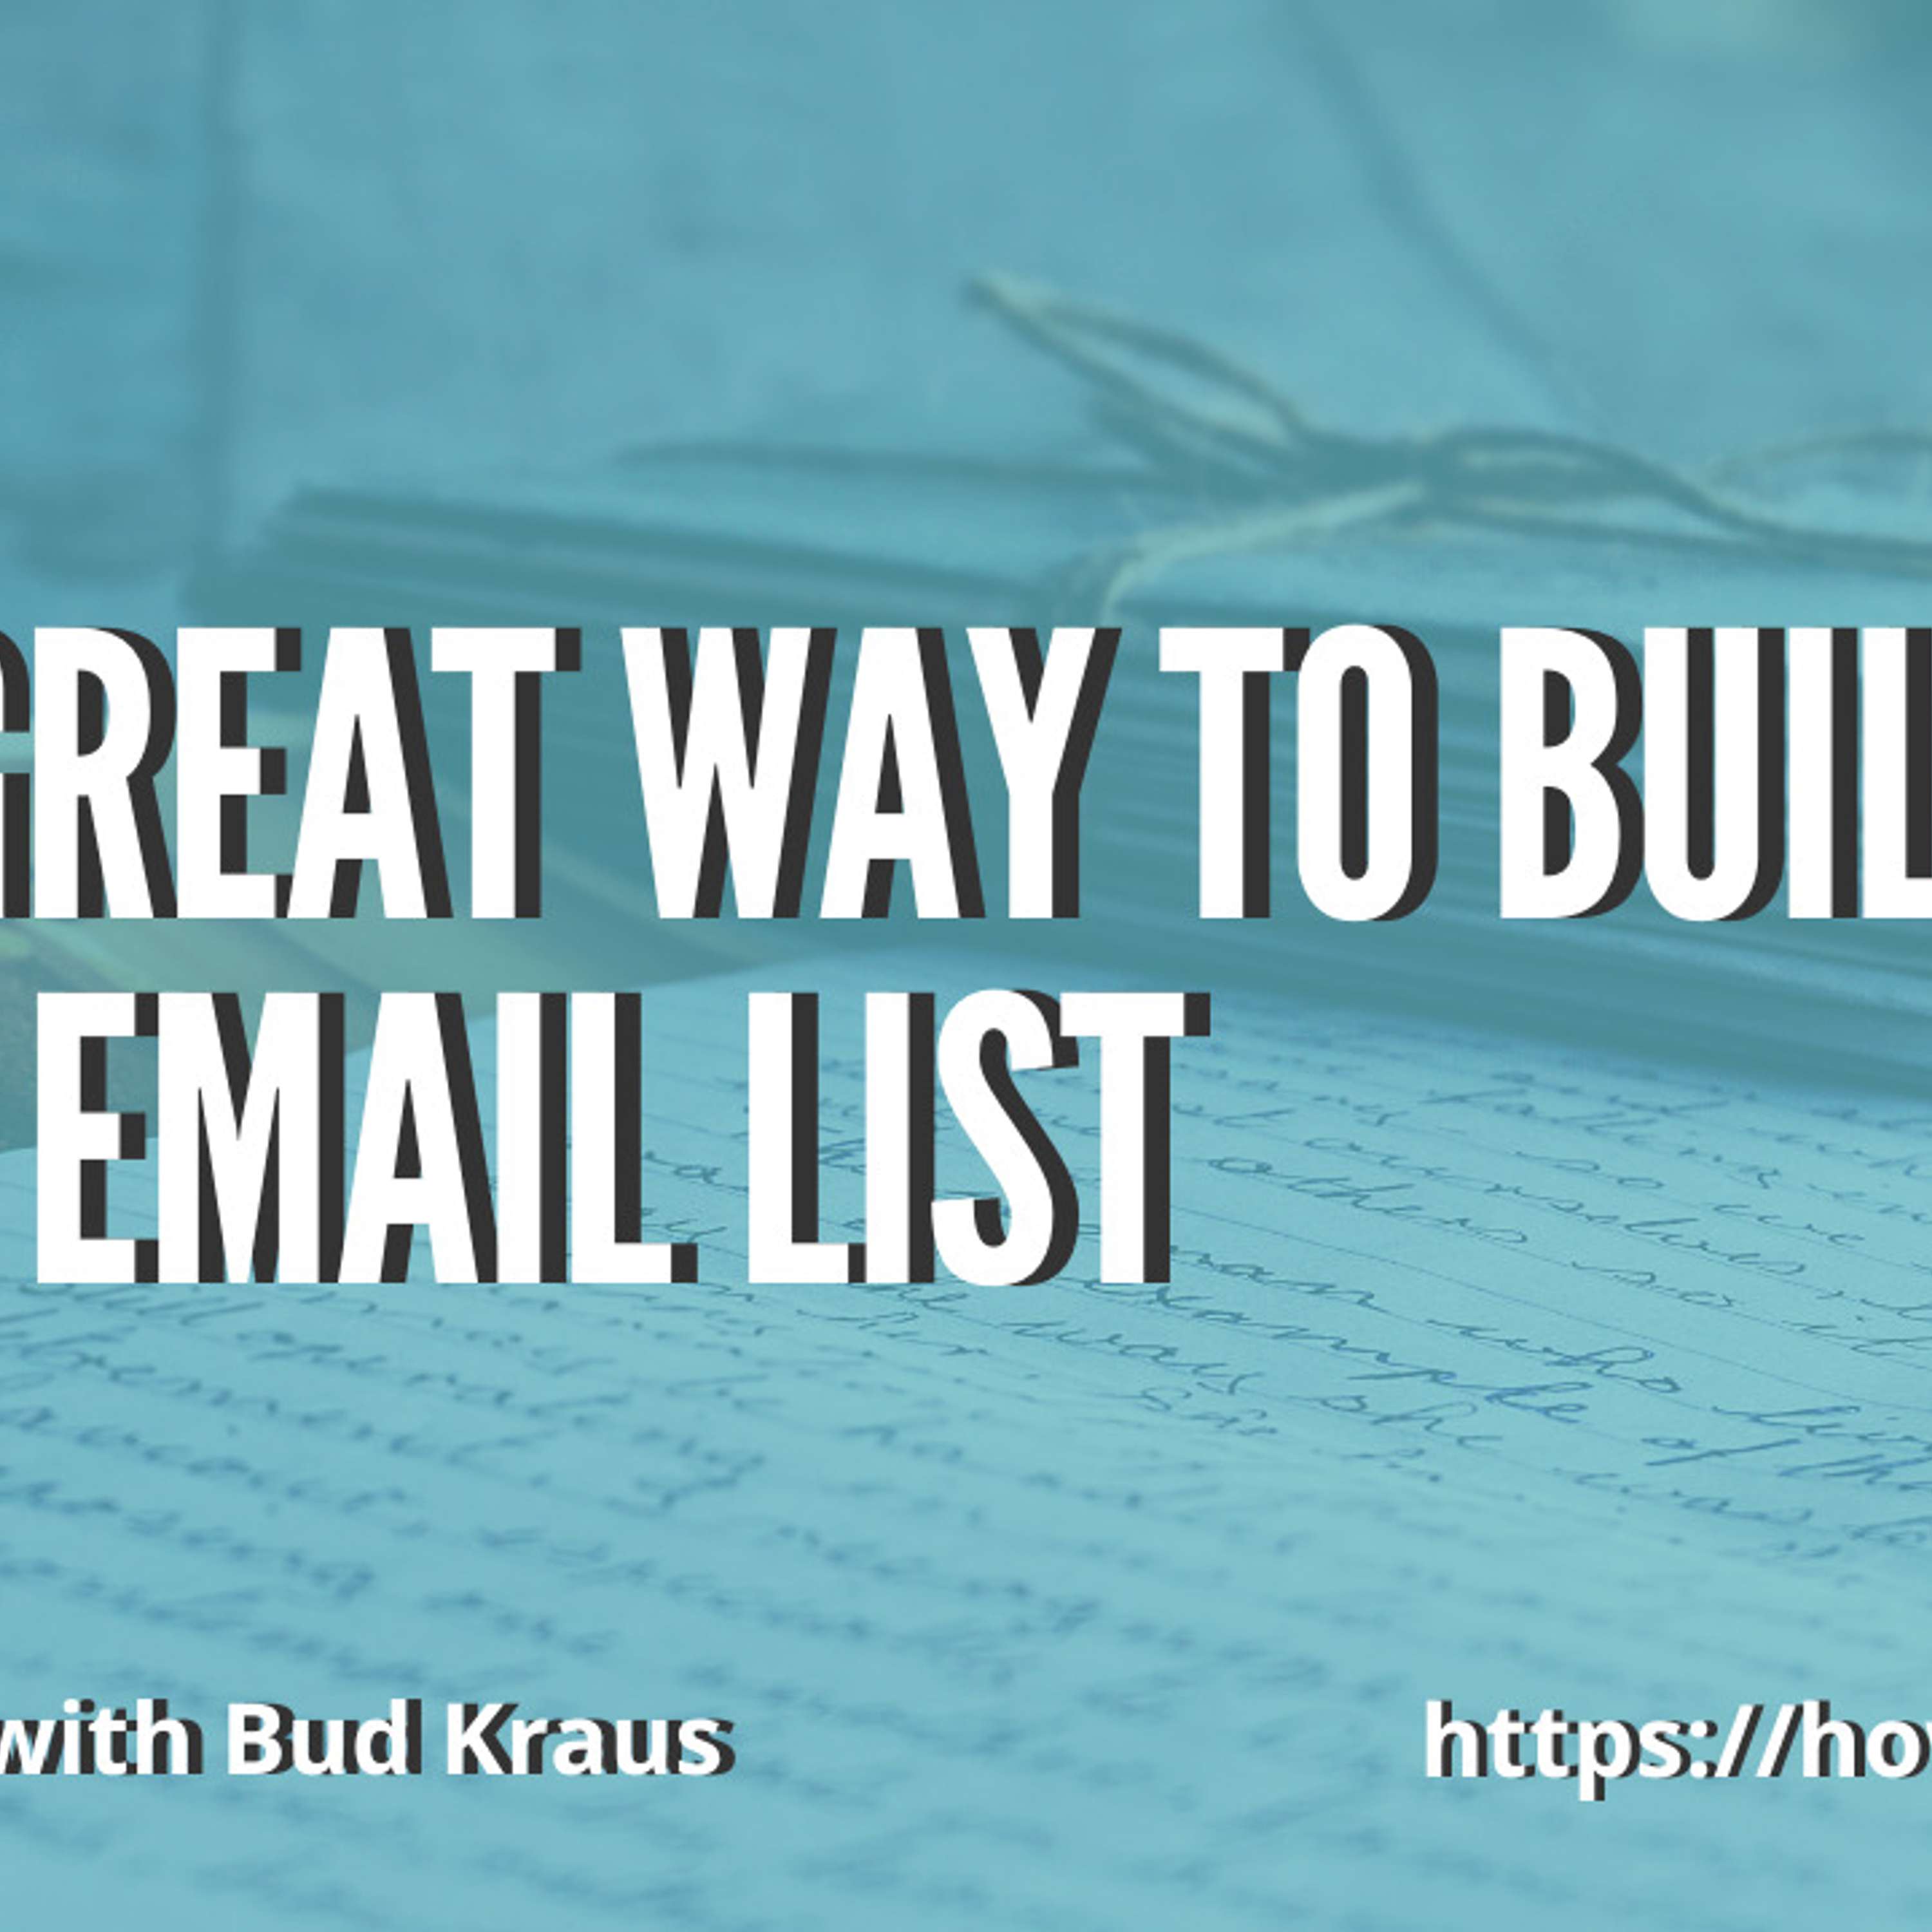 One Great Way to Build Your Email List with Bud Kraus